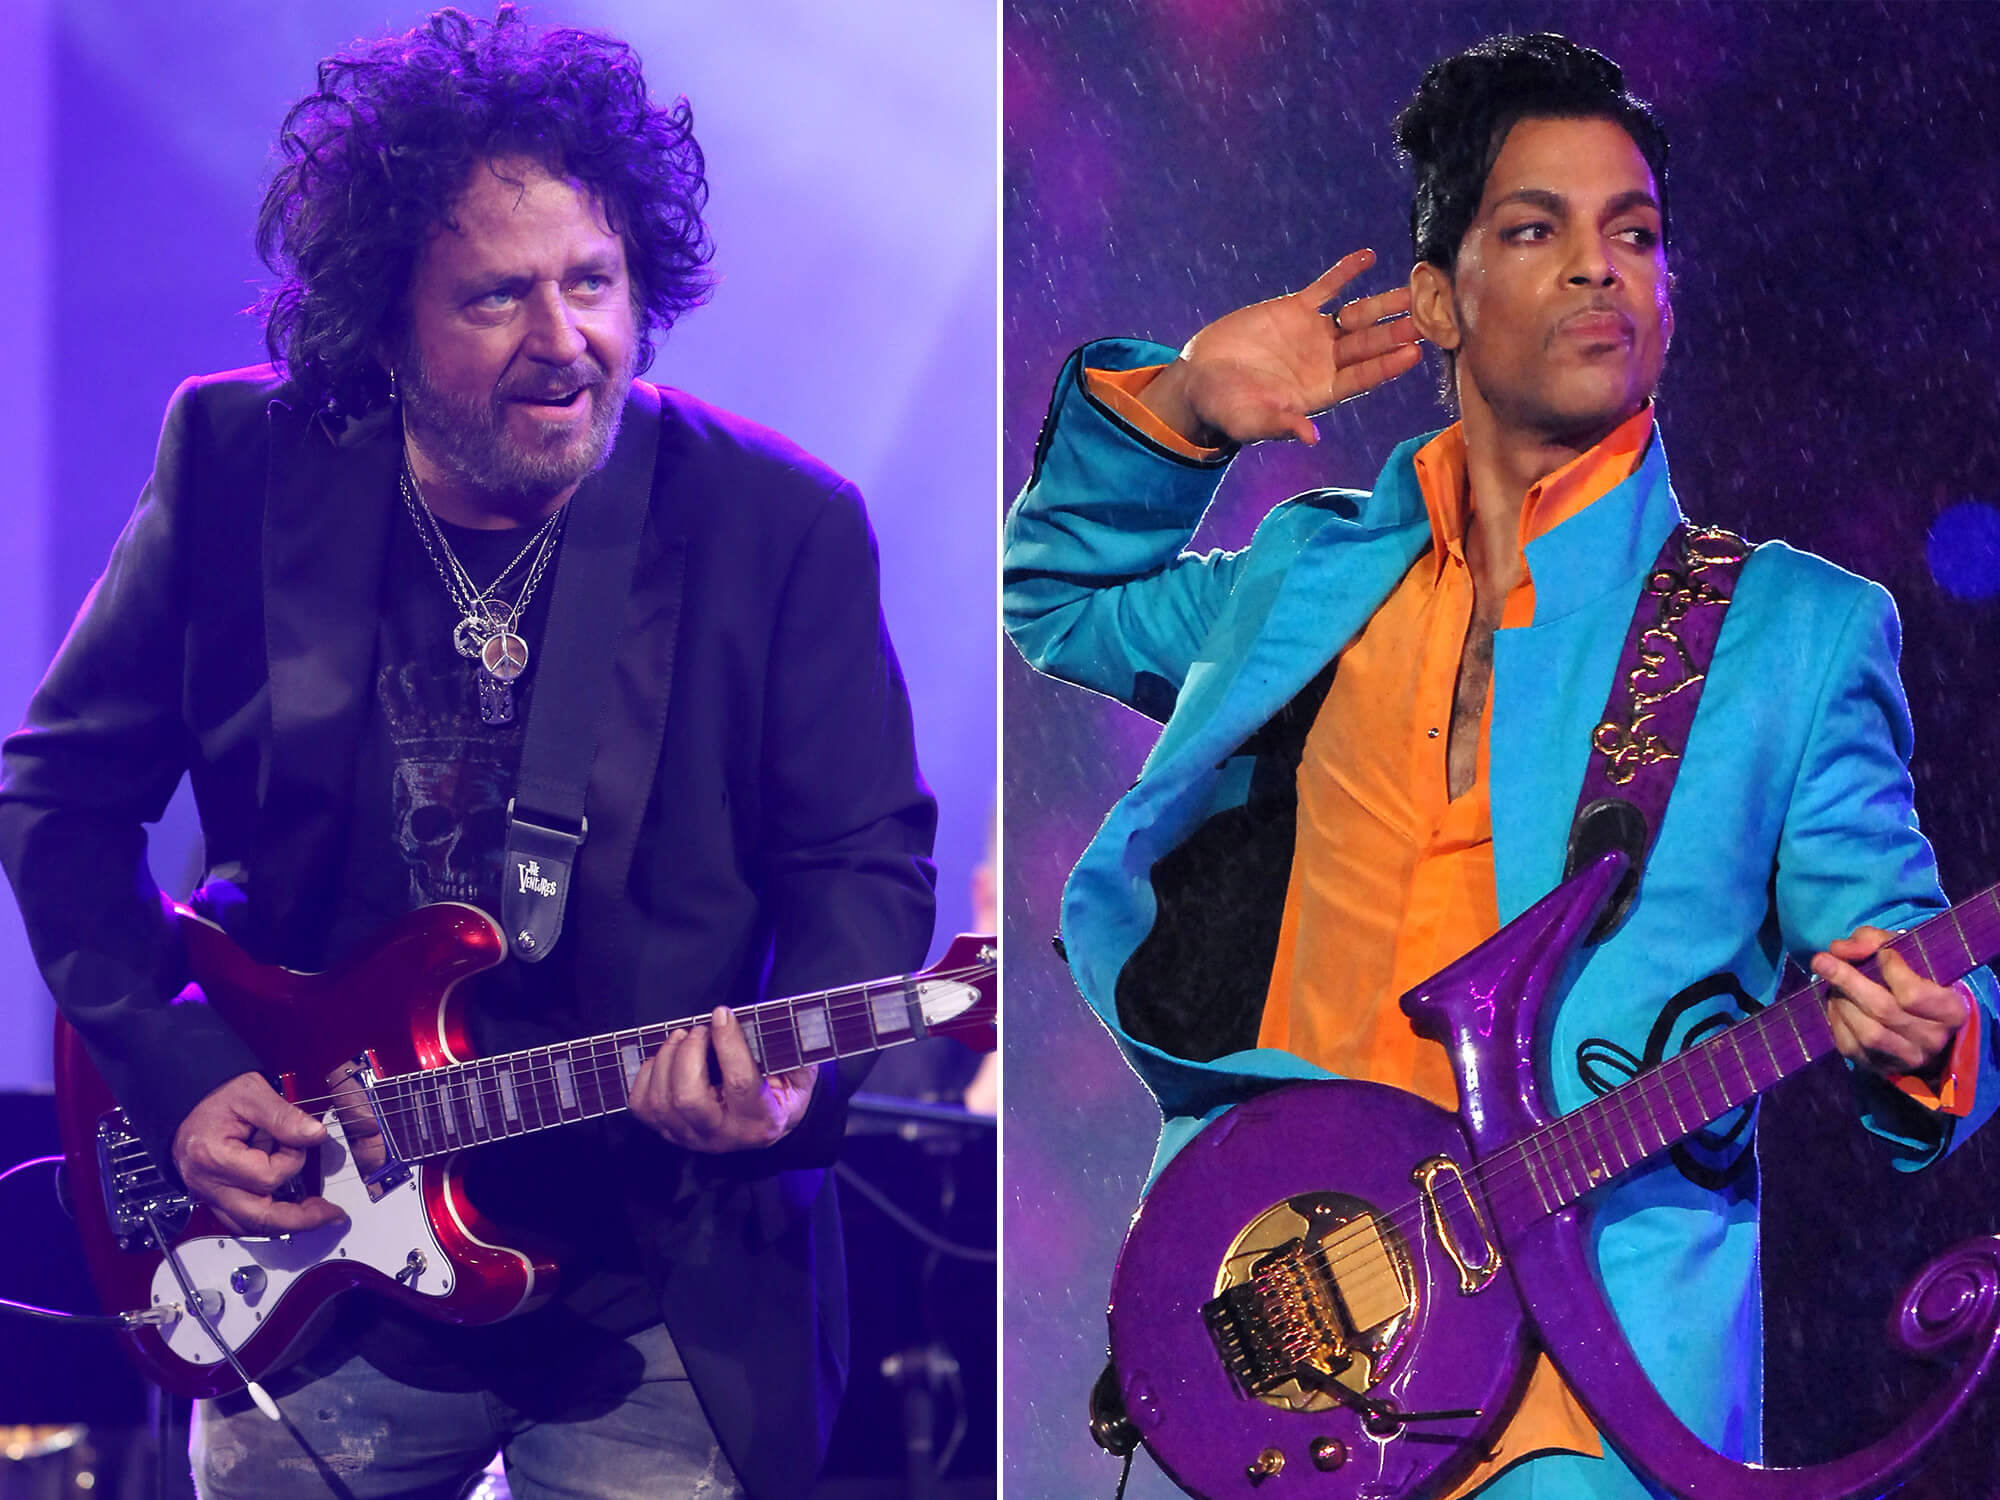 [L-R] Steve Lukather and Prince